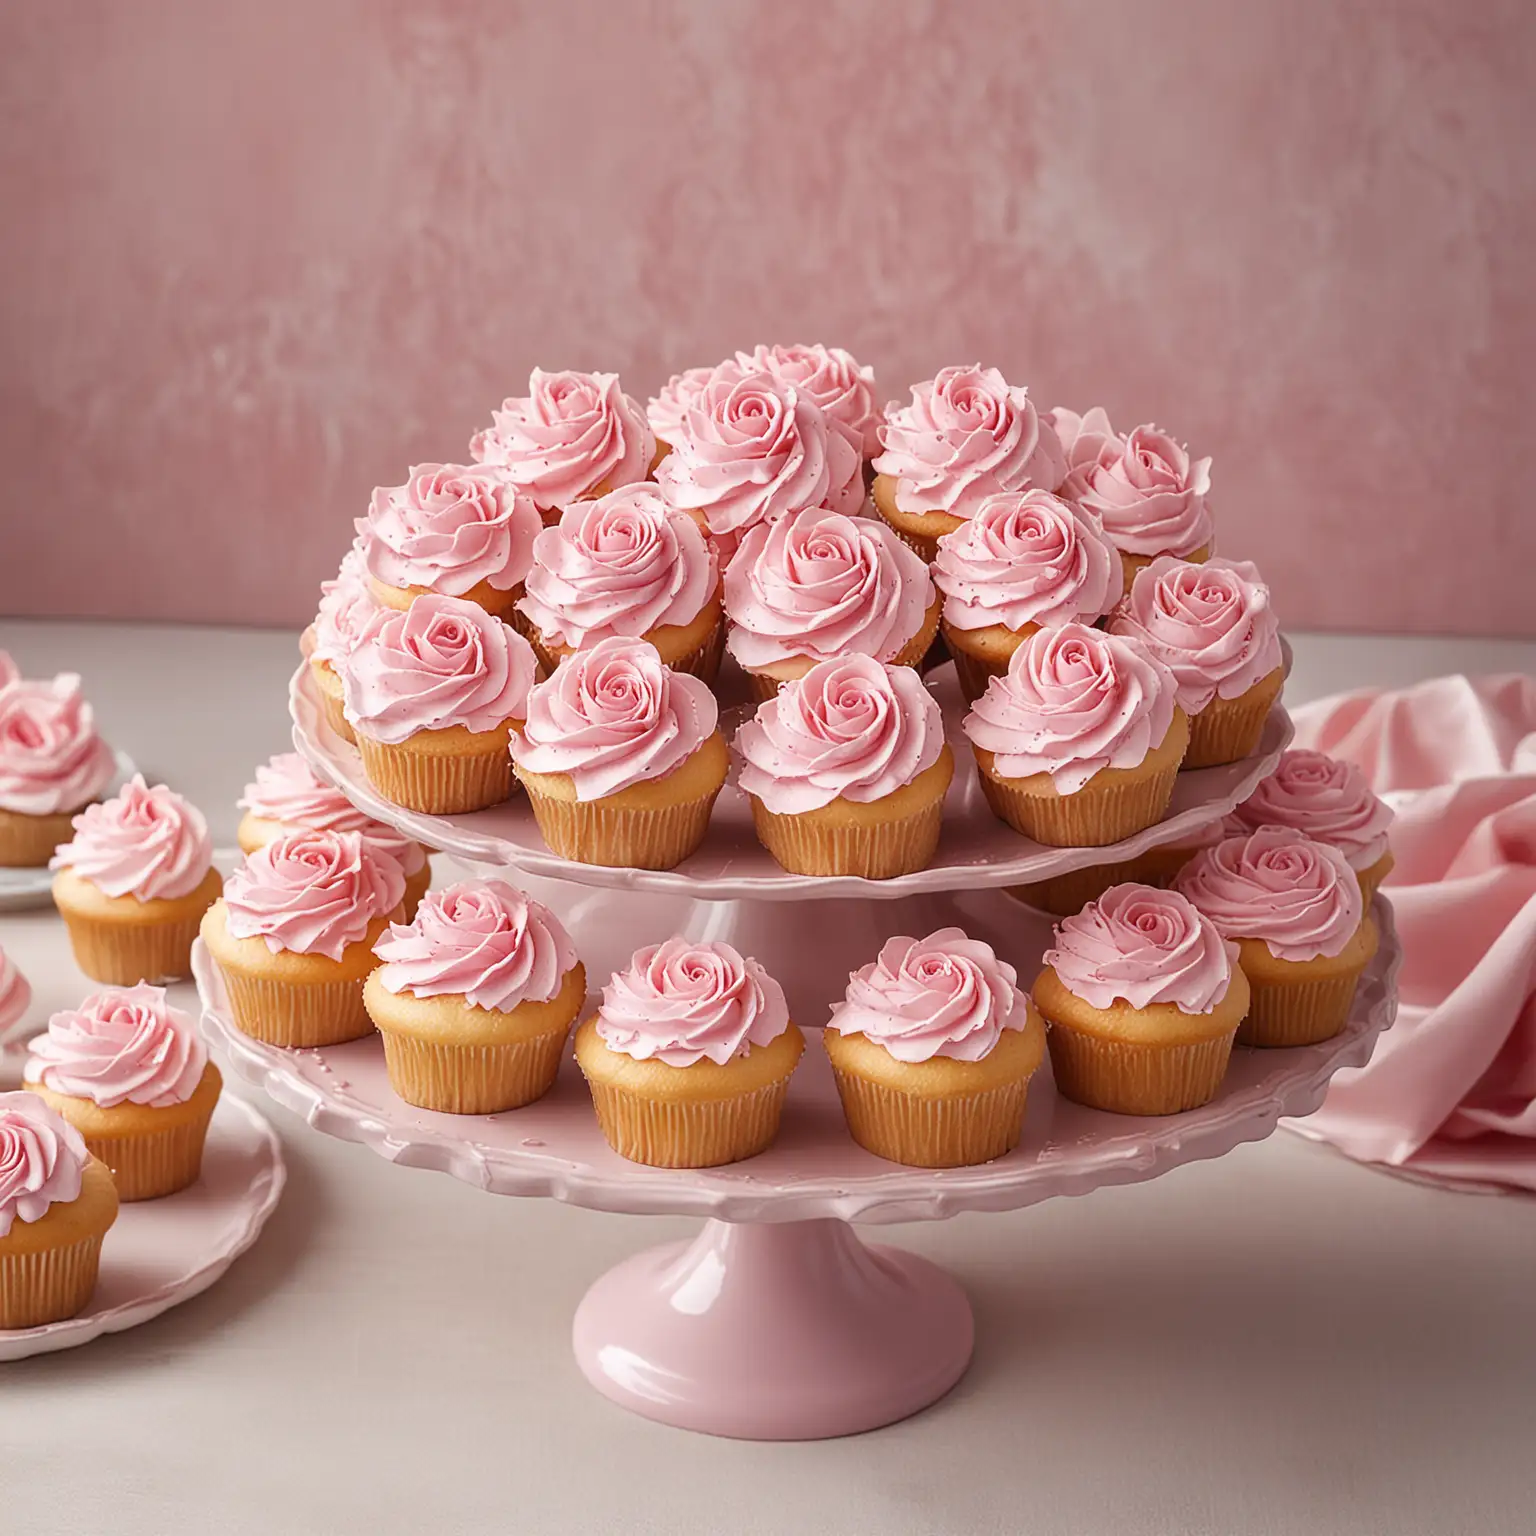 small round pink pedestal tray with a simple bouquet of pink roses and the bouquet is surrounded by a few pink frosted cupcakes, this is a wedding centerpiece; nothing else is in image; show image as one would see it sitting down at a table